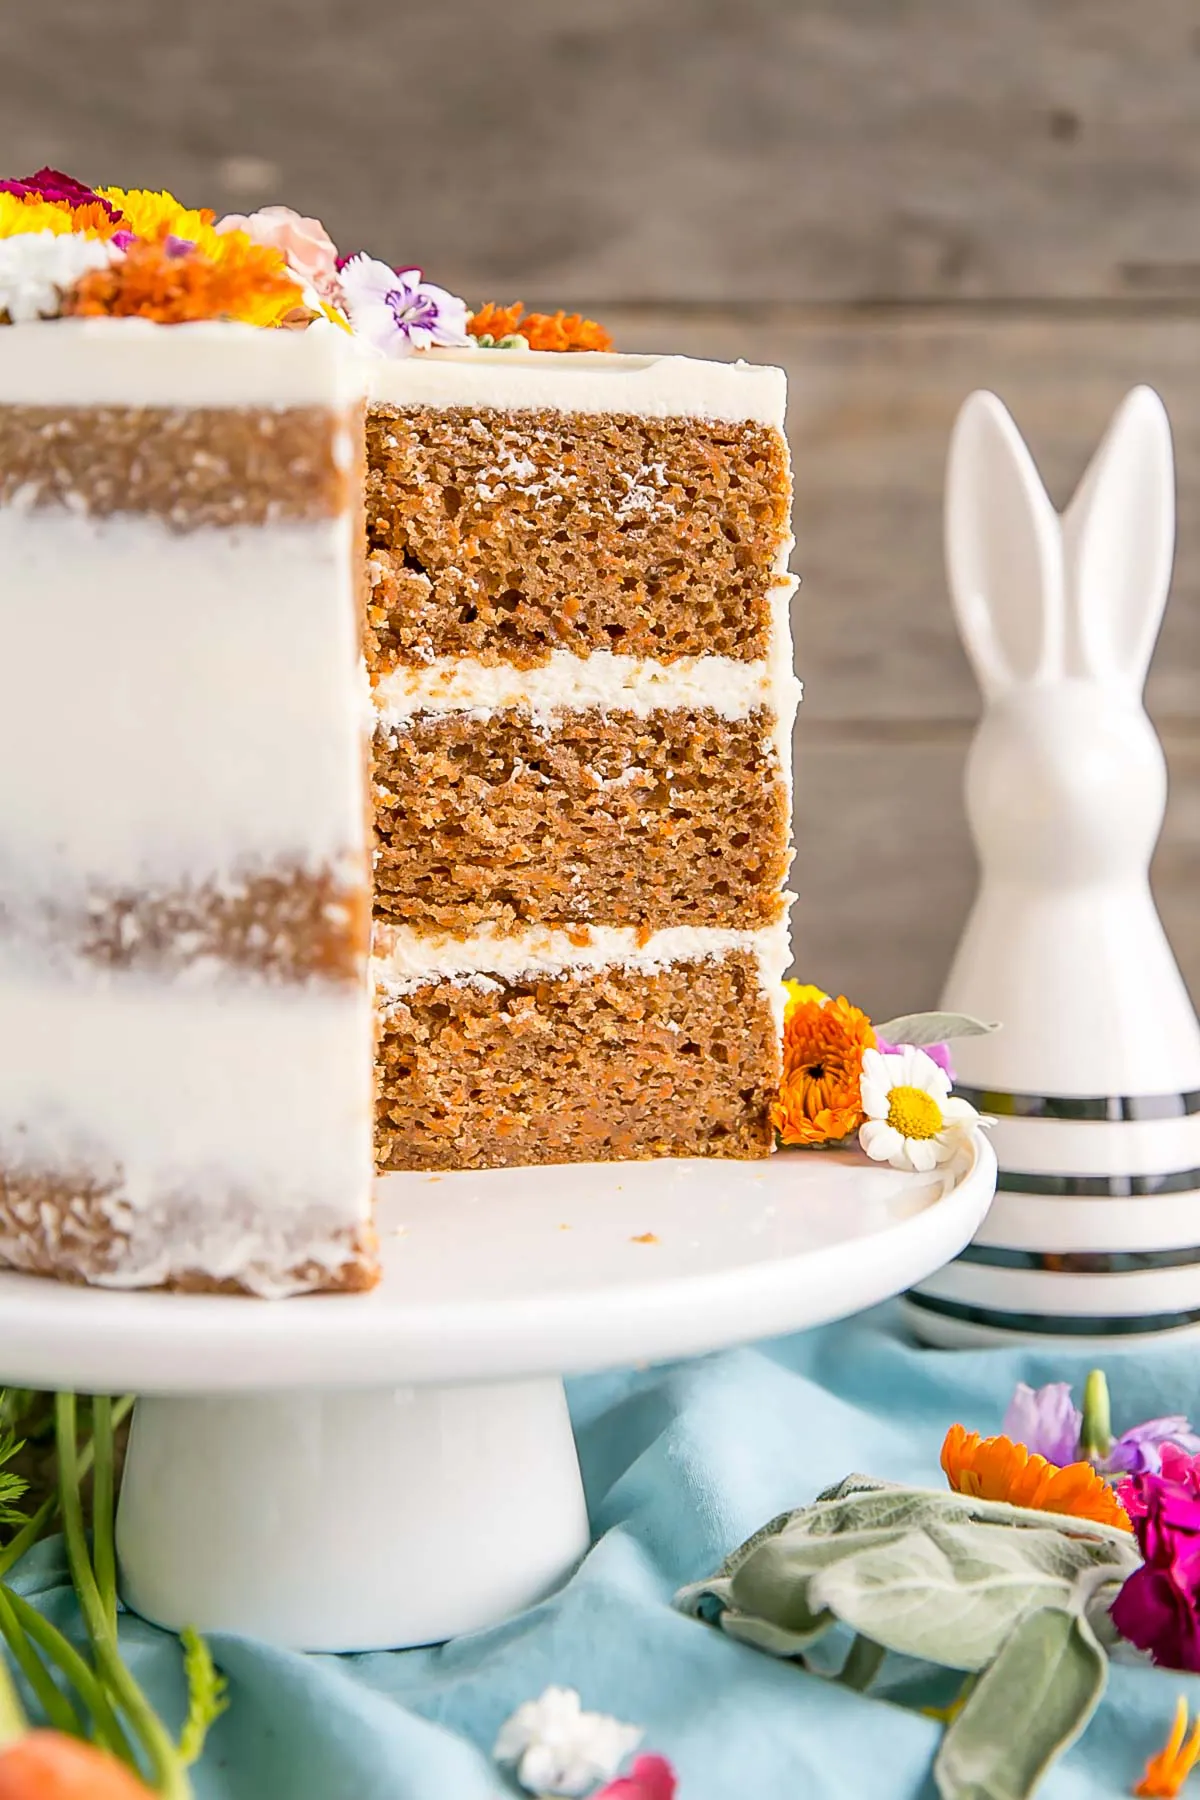 Naked carrot cake with edible flowers